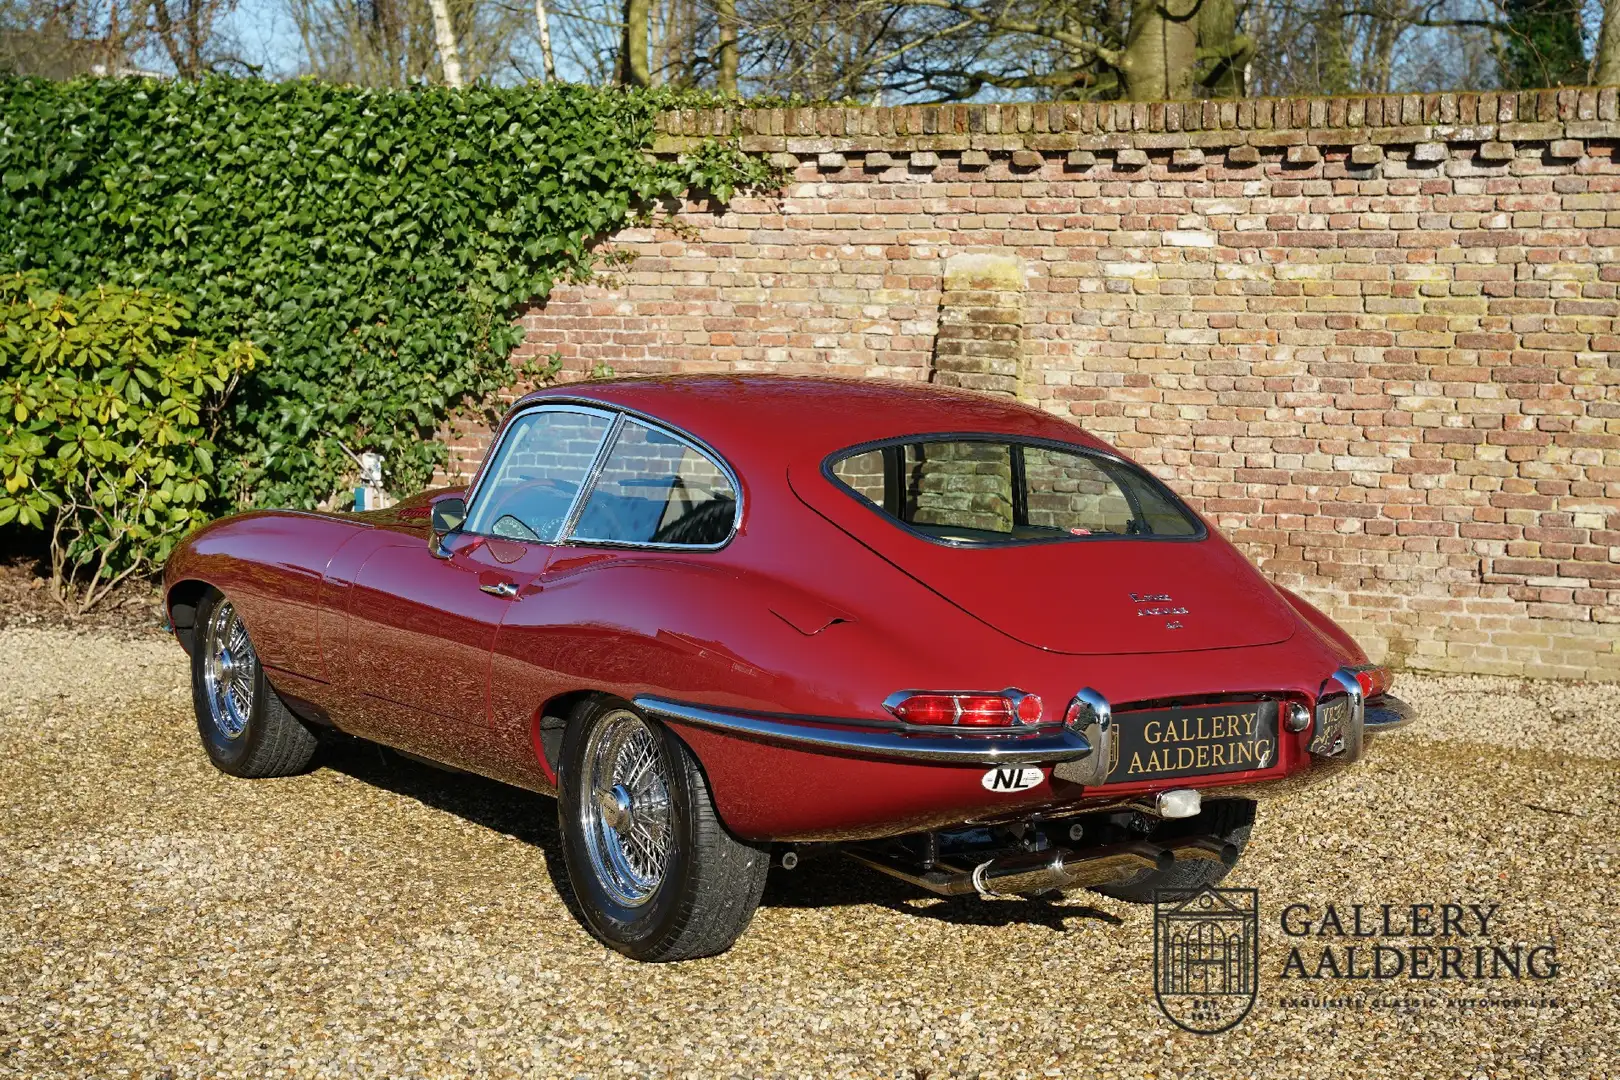 Jaguar E-Type 4.2 coupe series 1.5 Superb restored condition, Ma Rouge - 2